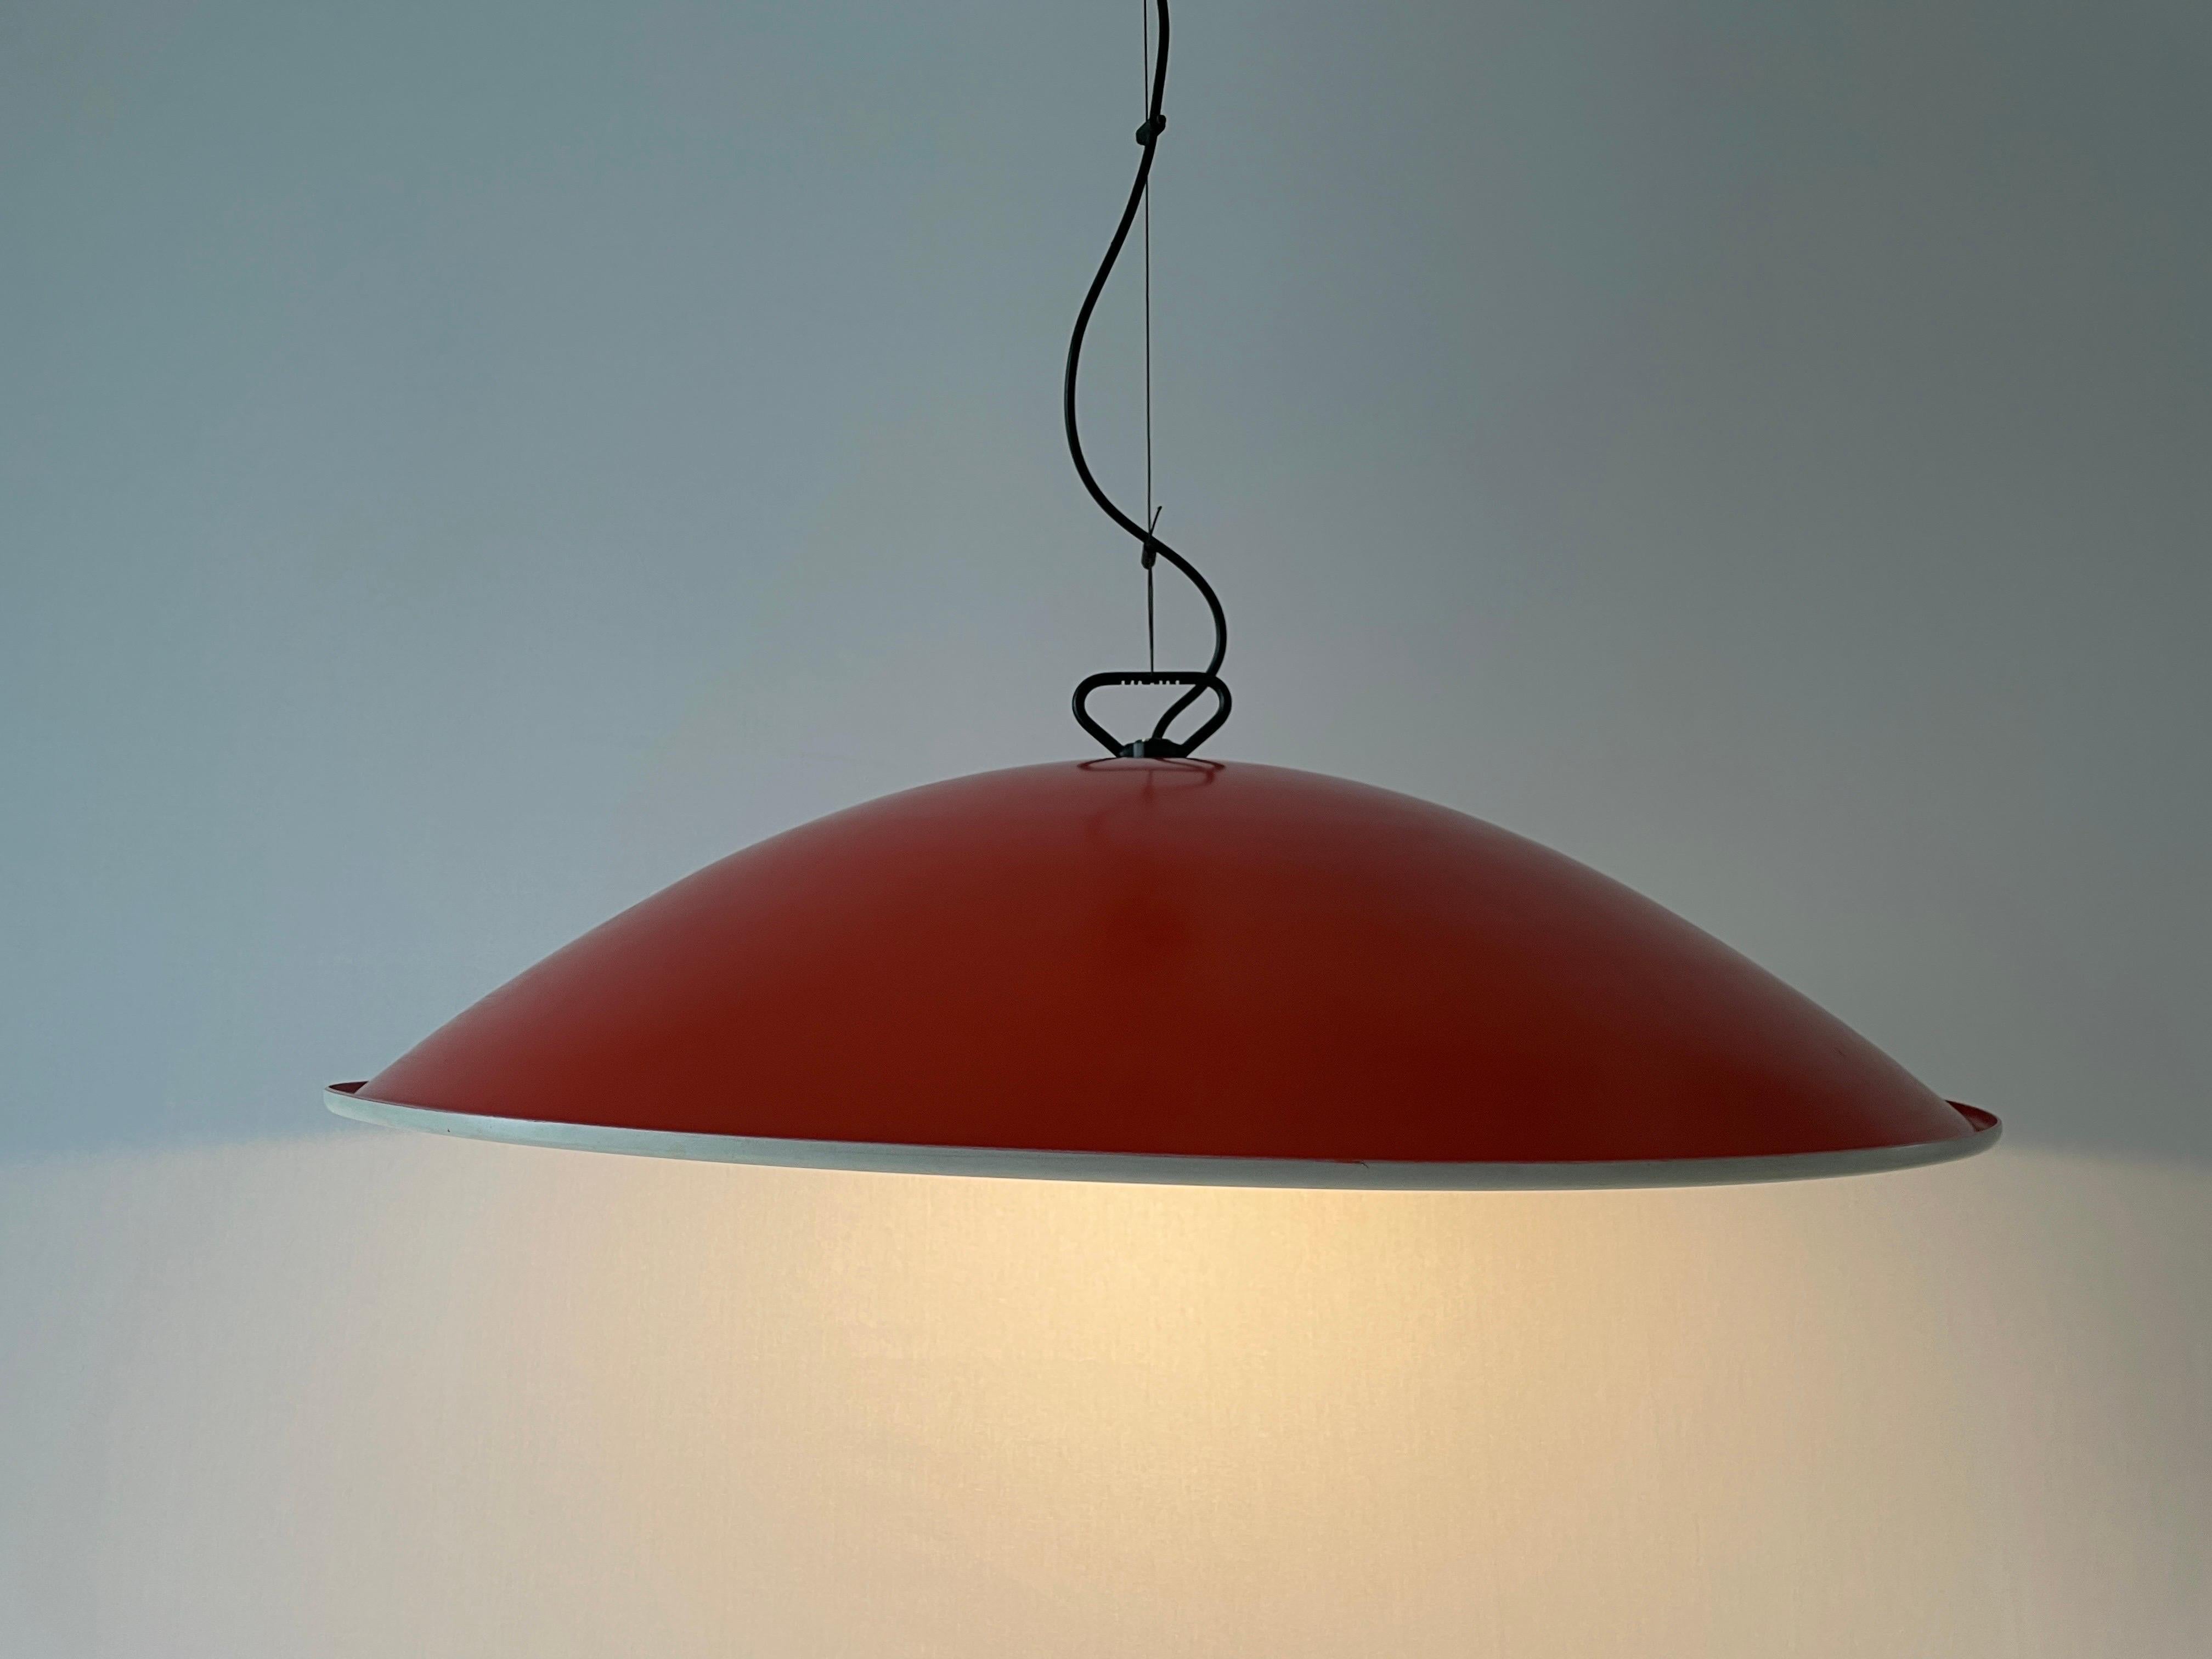 XXL Orange and White Metal Large Hotel Pendant Lamp, 1960s, Italy For Sale 7